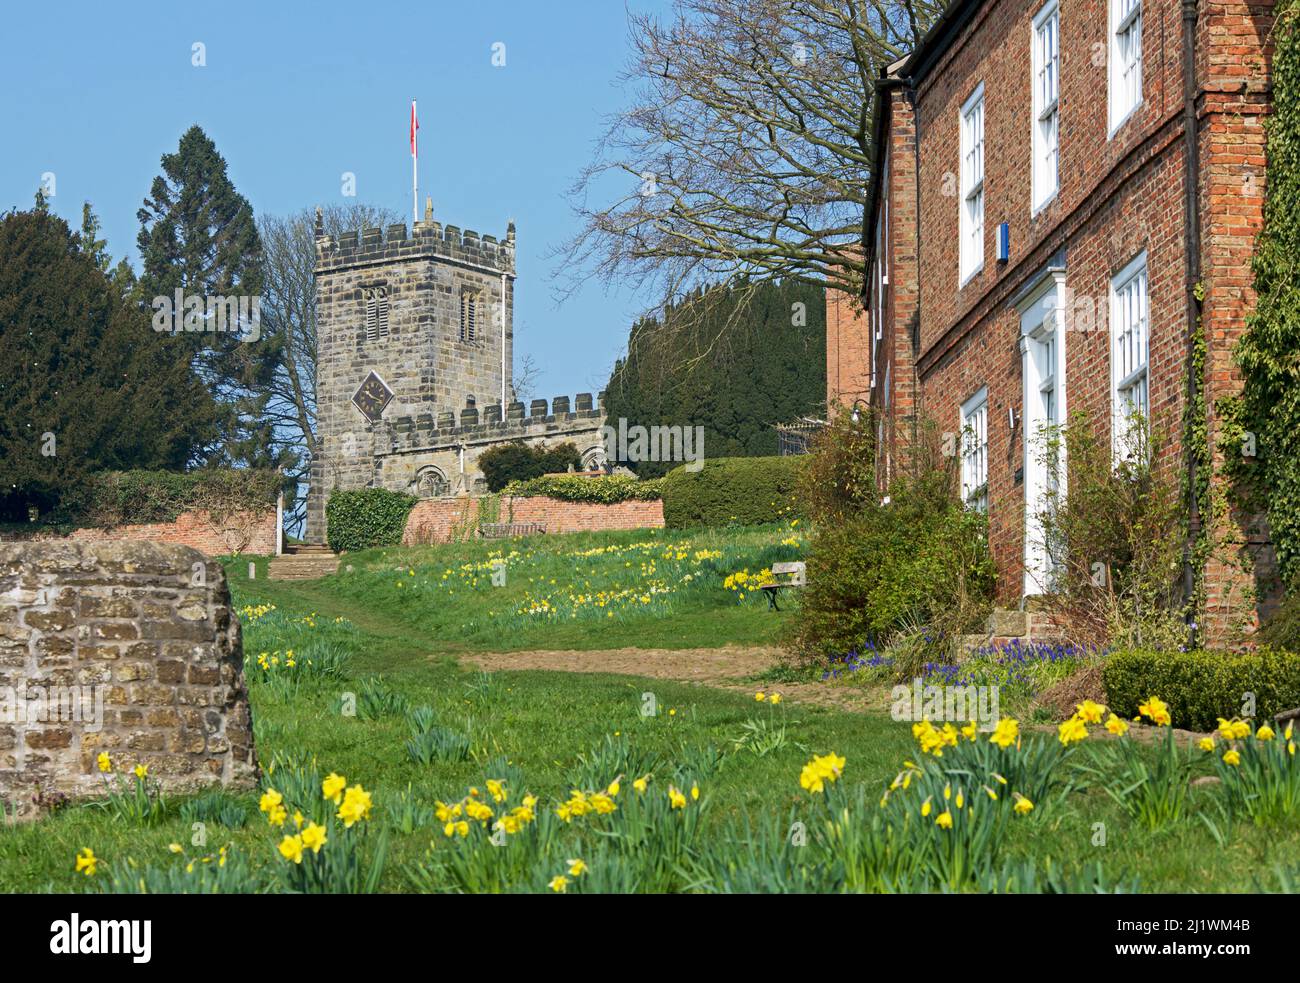 St Cuthbert's church in the village of Crayke, North Yorkshire, England UK Stock Photo